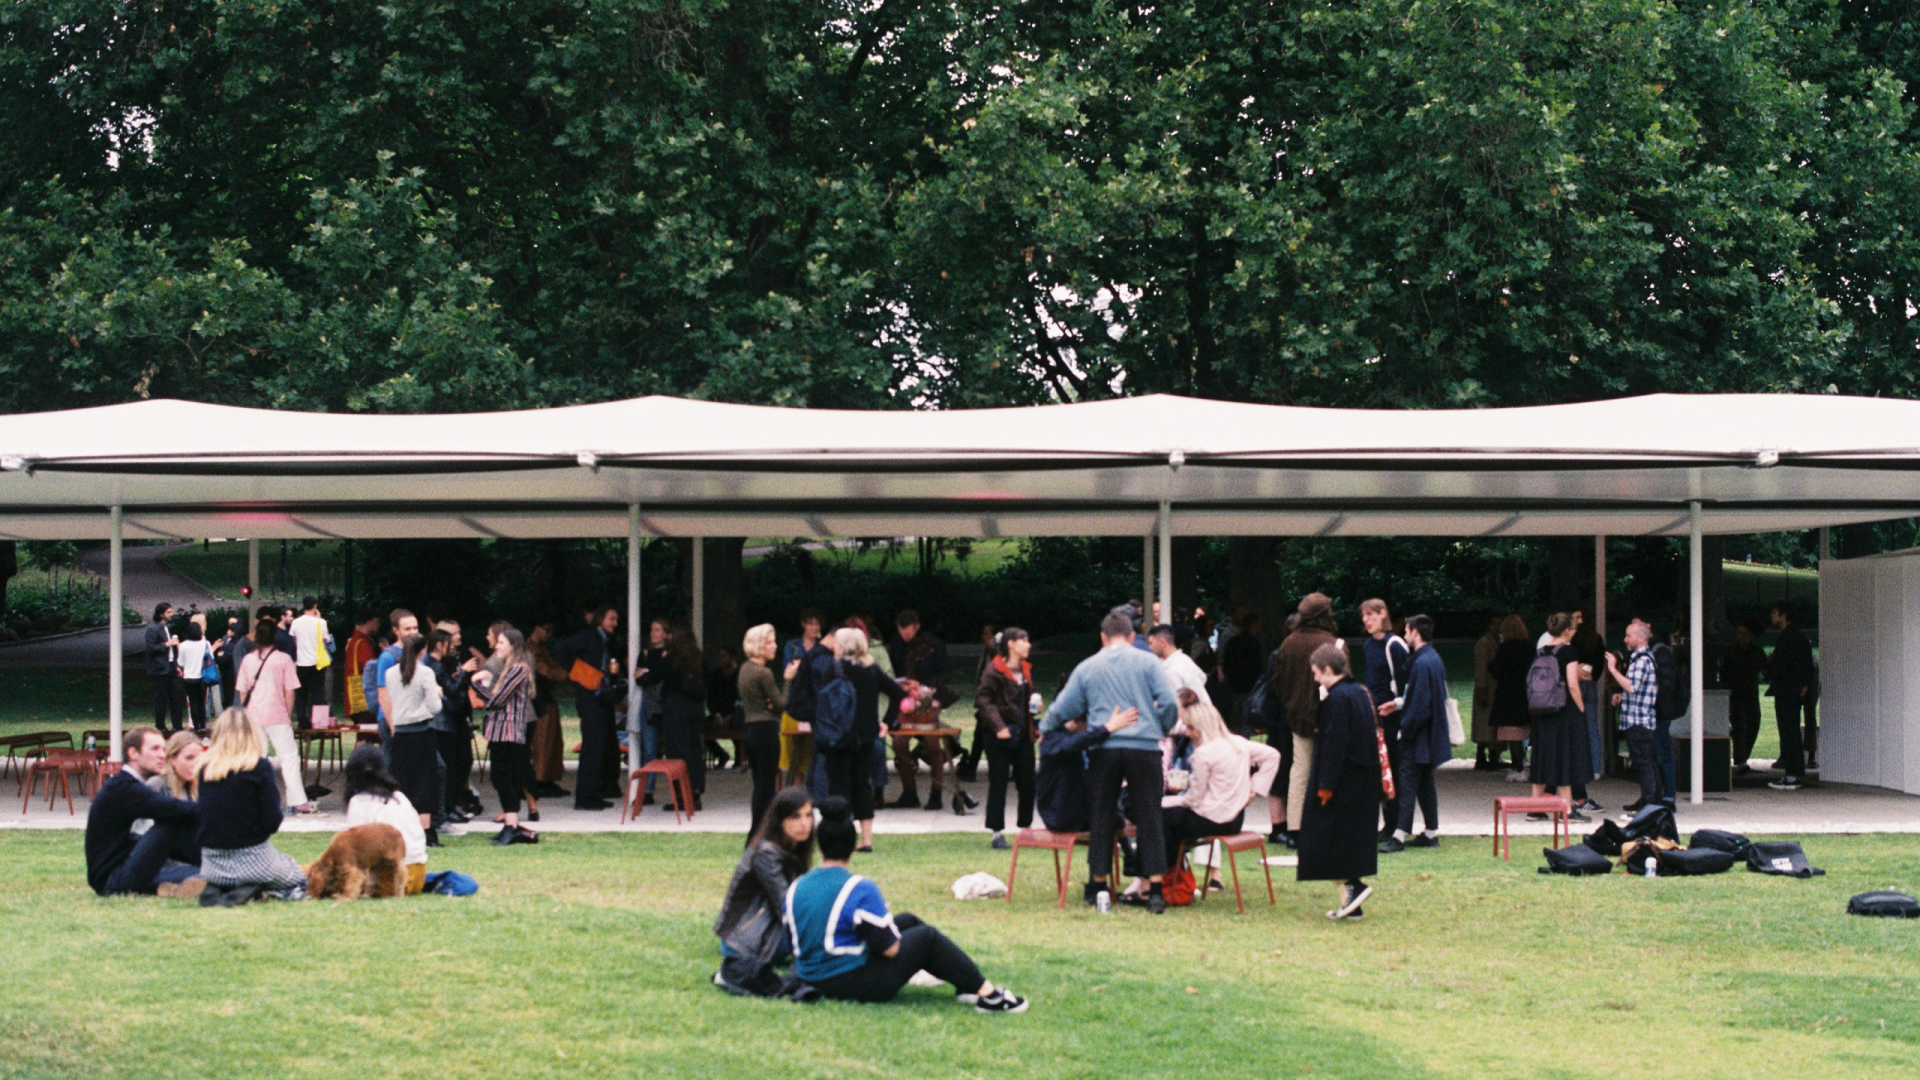 People gathering around a pavilion for a previous launch of the journal Caliper.